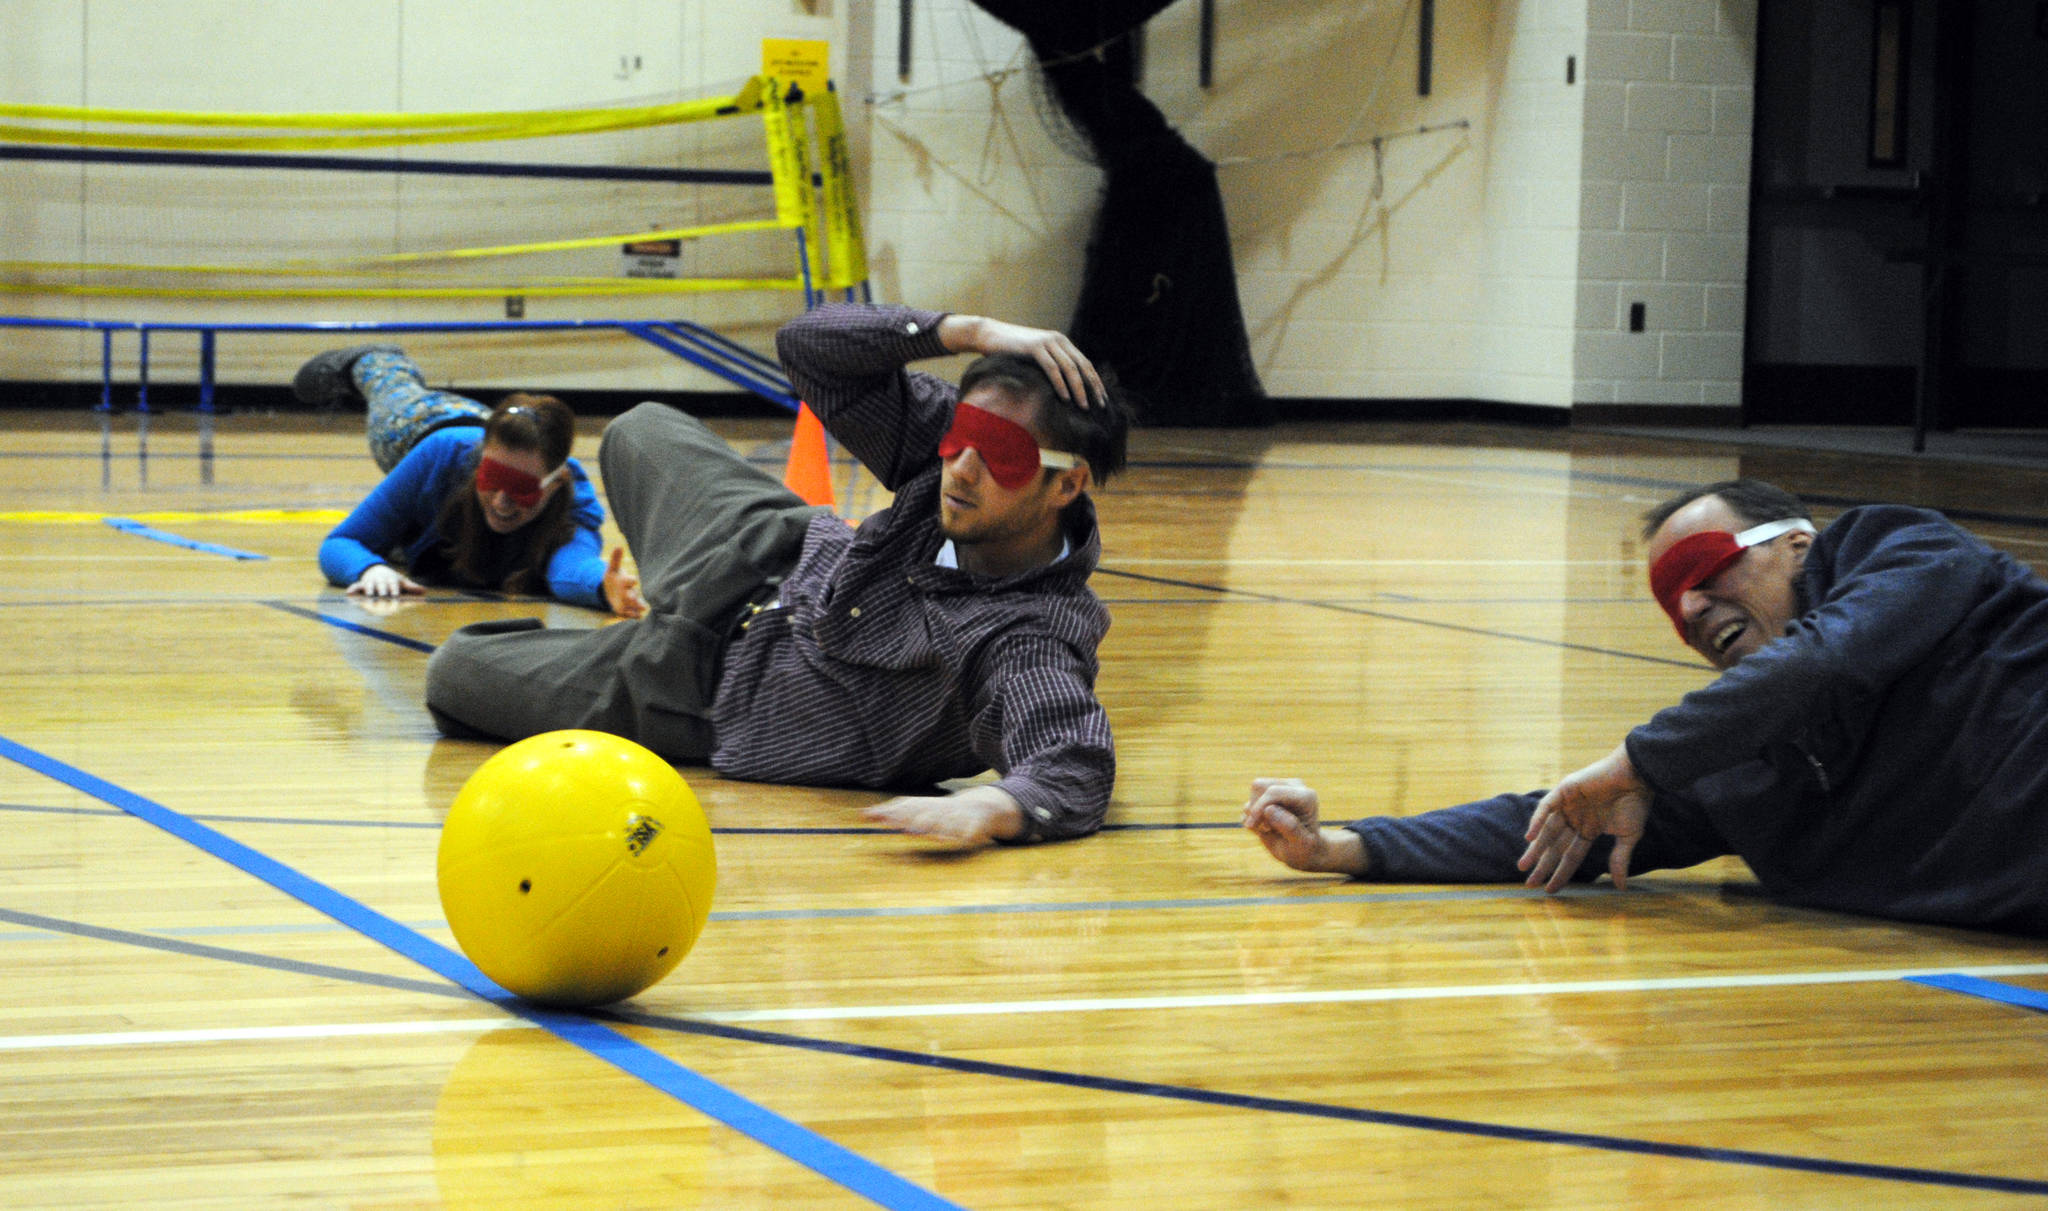 River City Academy teachers Annaleah Karron, Chris Kolishchak and Thomas Degray defend their goal in a Monday morning game of goalball at River City Academy in Soldotna, Alaska. Since the game is meant to be played by those with visual impairments, each team member had to wear blindfolds and listen for the ball, which is equipped with a jingling bell. (Photo by Kat Sorensen/Peninsula Clarion)